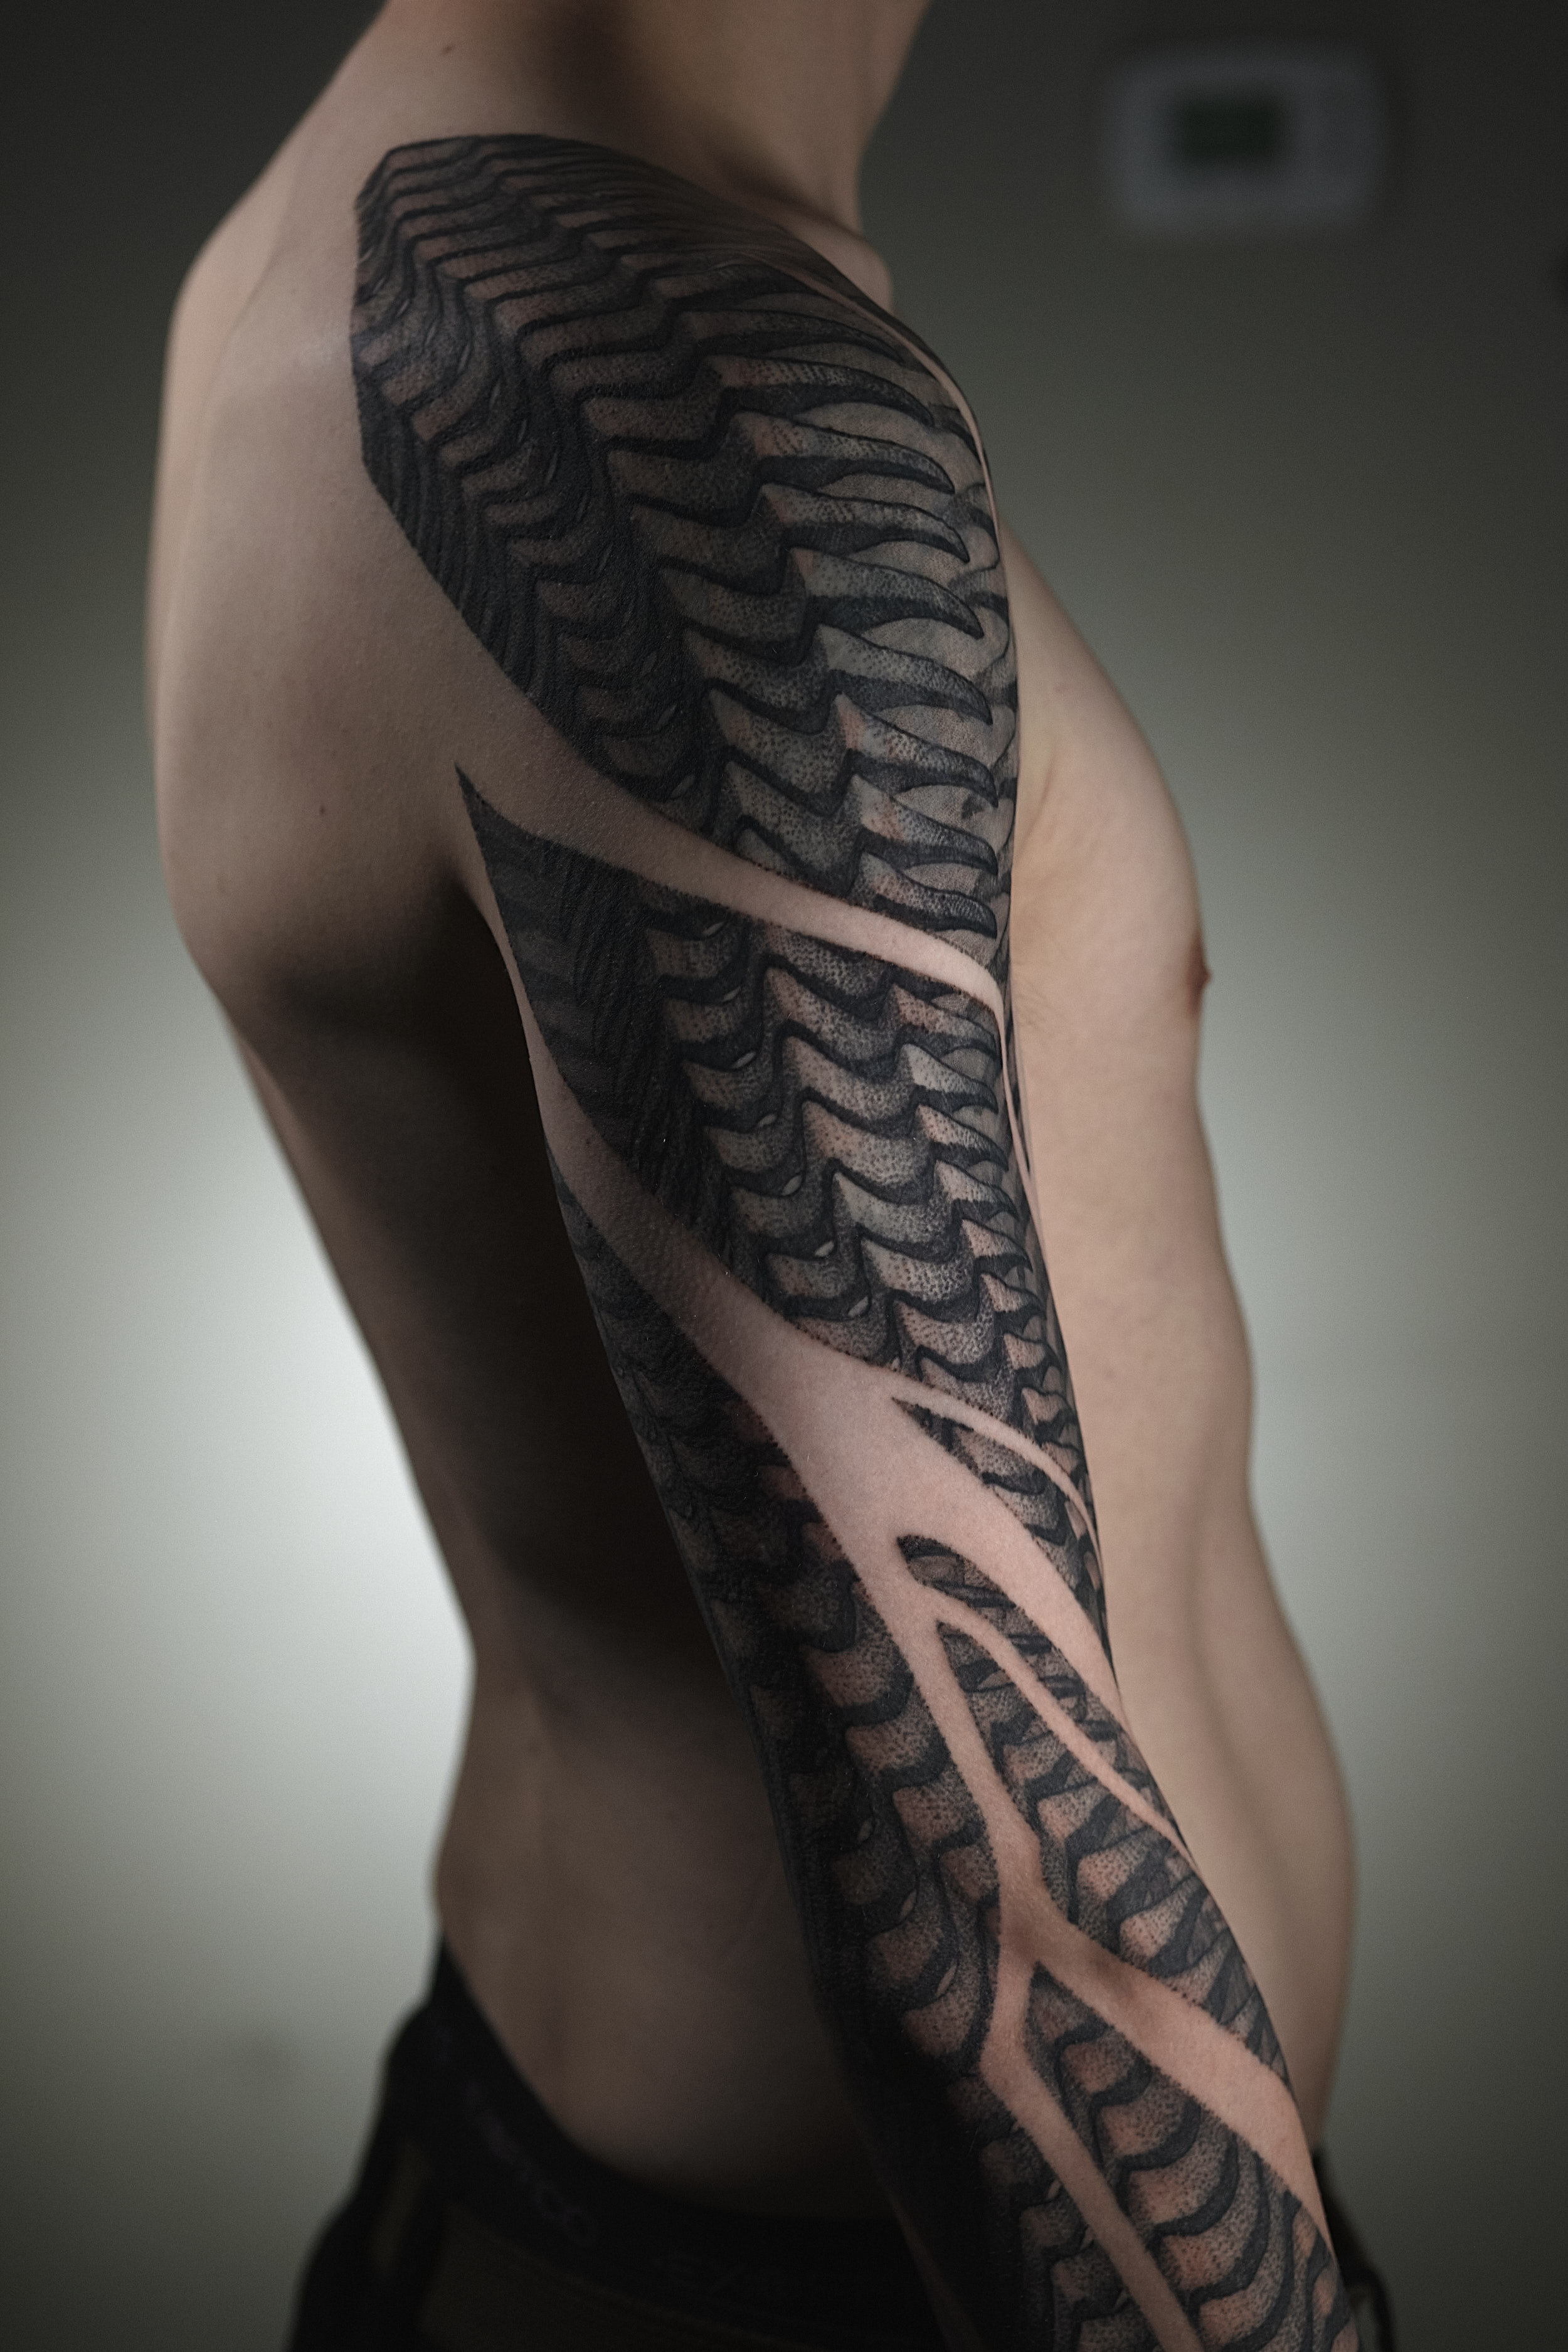 3AT1 Paarl on Twitter This 3D Arm Tattoo is Melting my Mind  httptcoZ7cb5KEFb9 httptcoQA0rQAks9v  Twitter